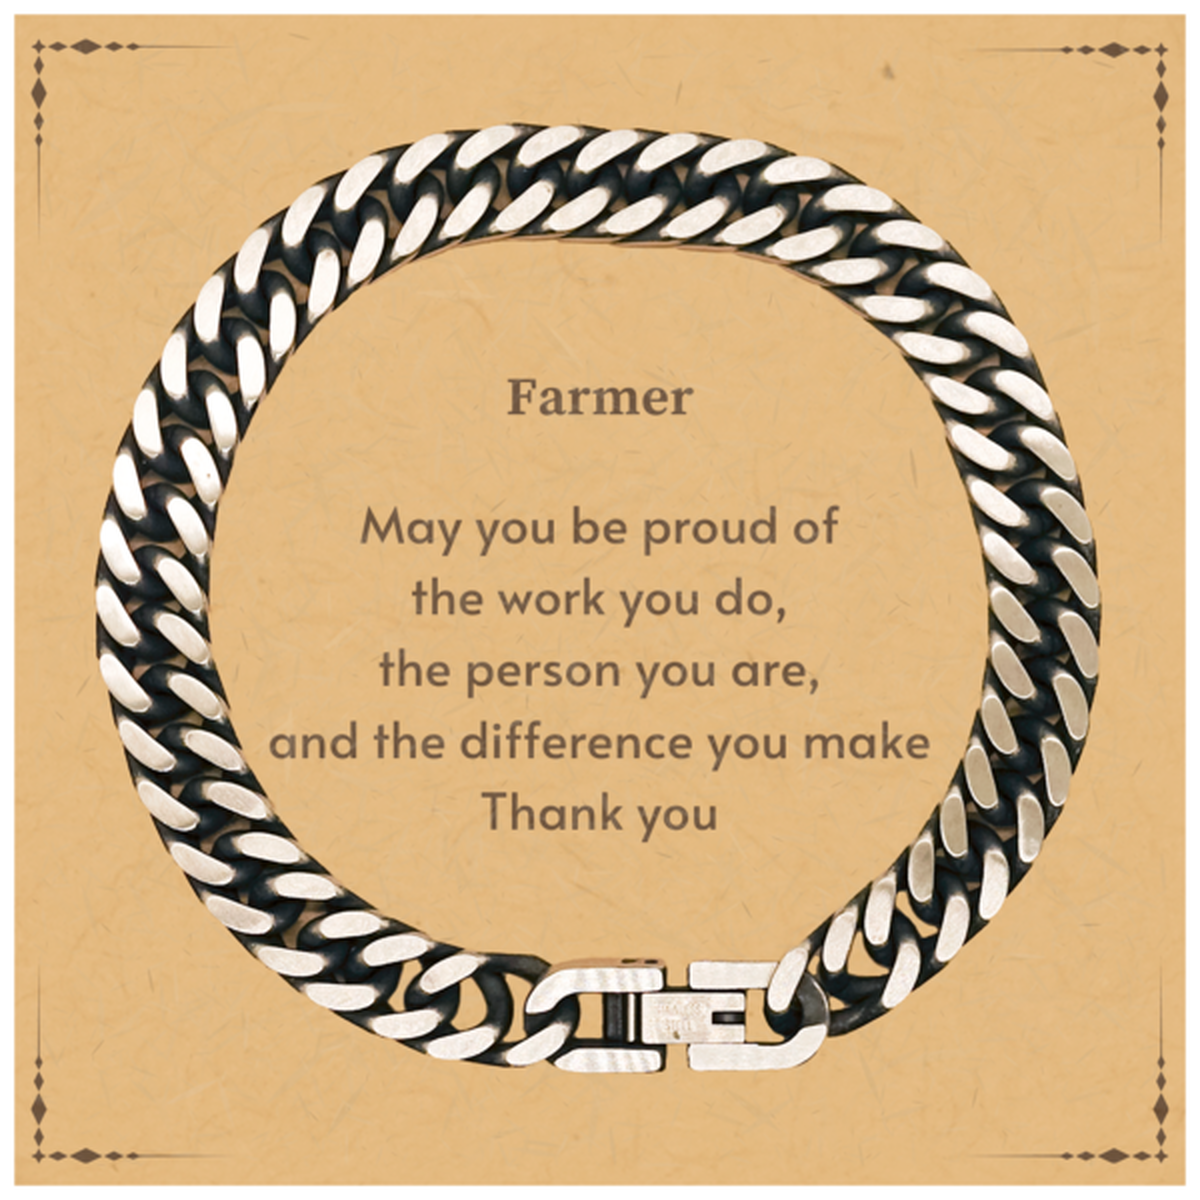 Heartwarming Cuban Link Chain Bracelet Retirement Coworkers Gifts for Farmer, Farmer May You be proud of the work you do, the person you are Gifts for Boss Men Women Friends